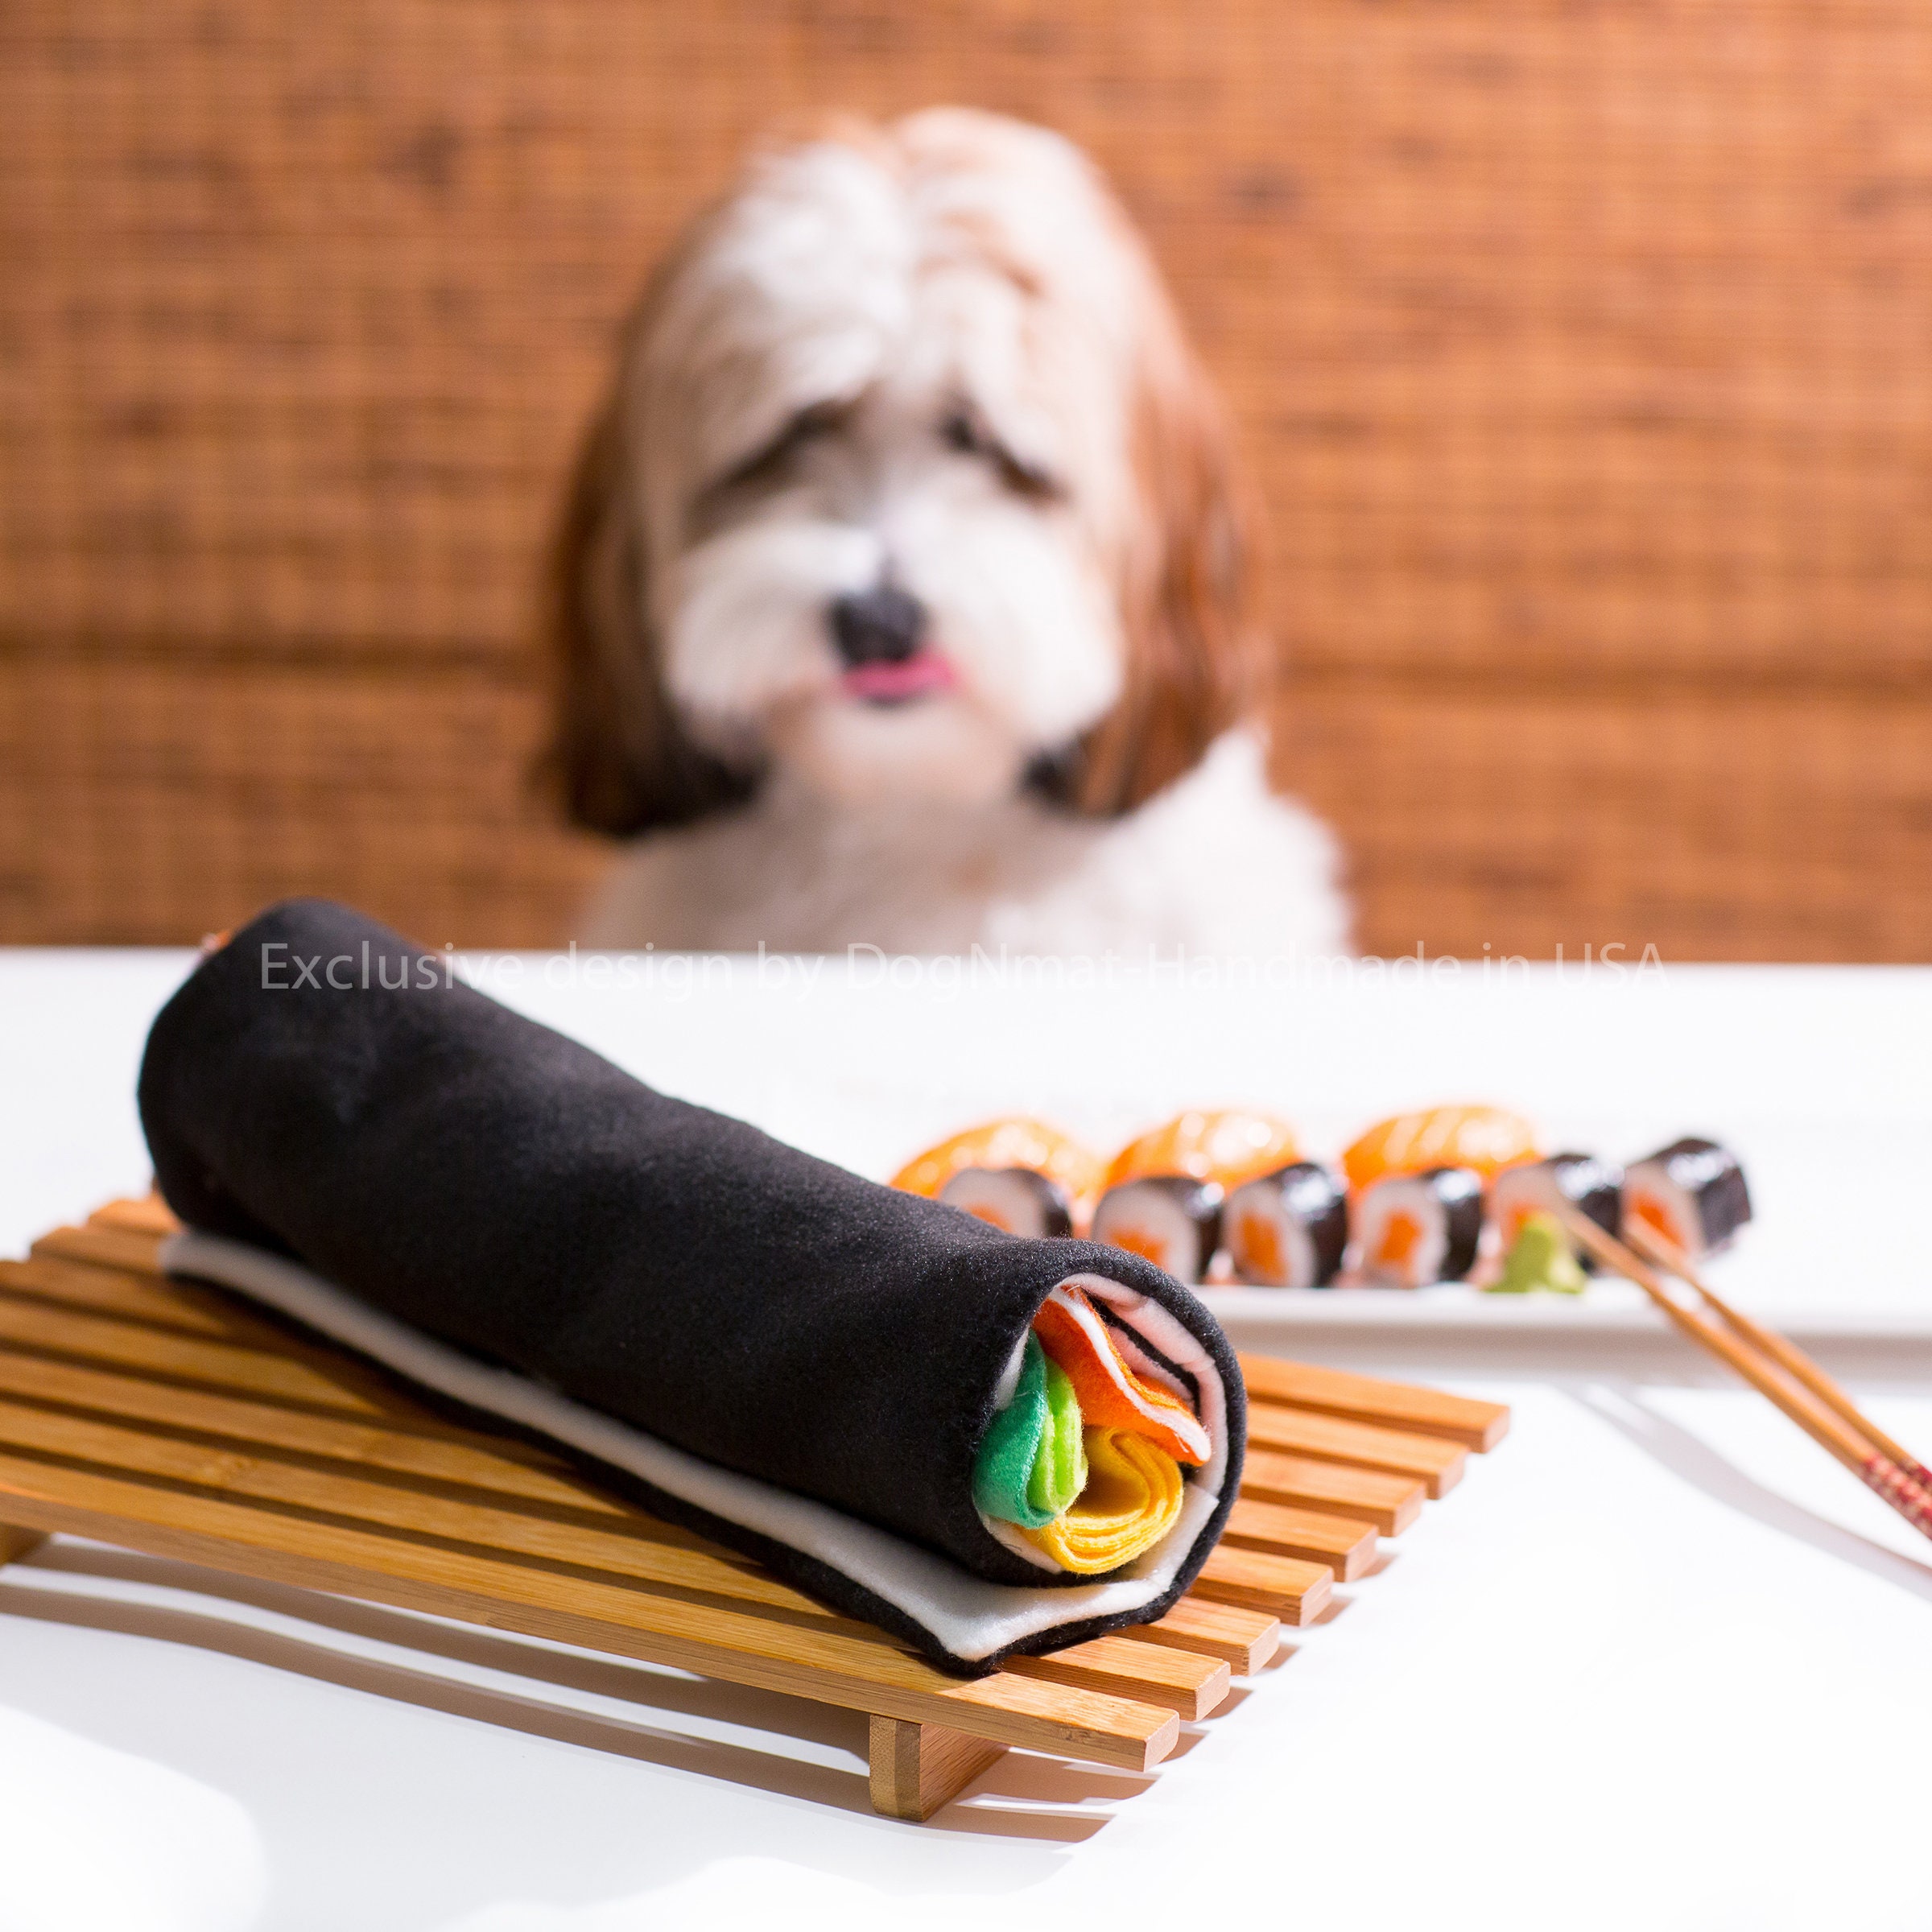 5 Easy Enrichment Ideas for Dogs - Oh My Paws